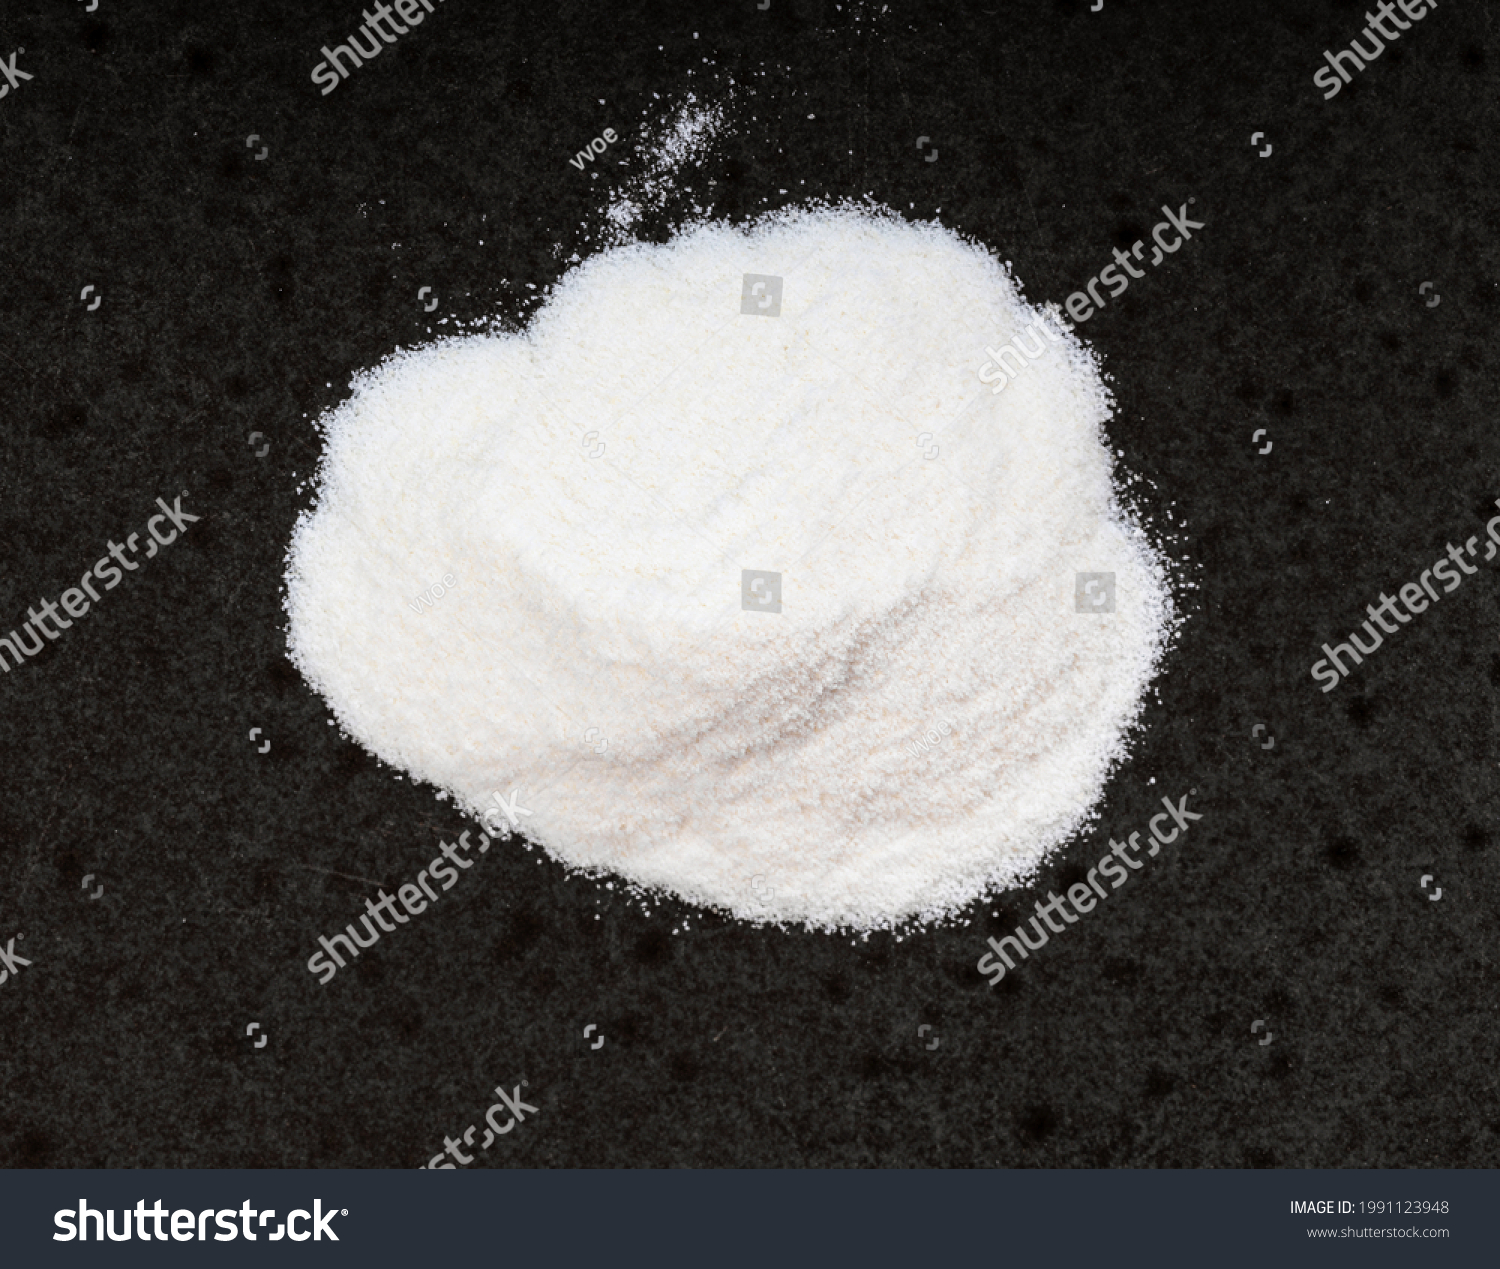 top view of pile of agar powder close up on black ceramic plate #1991123948